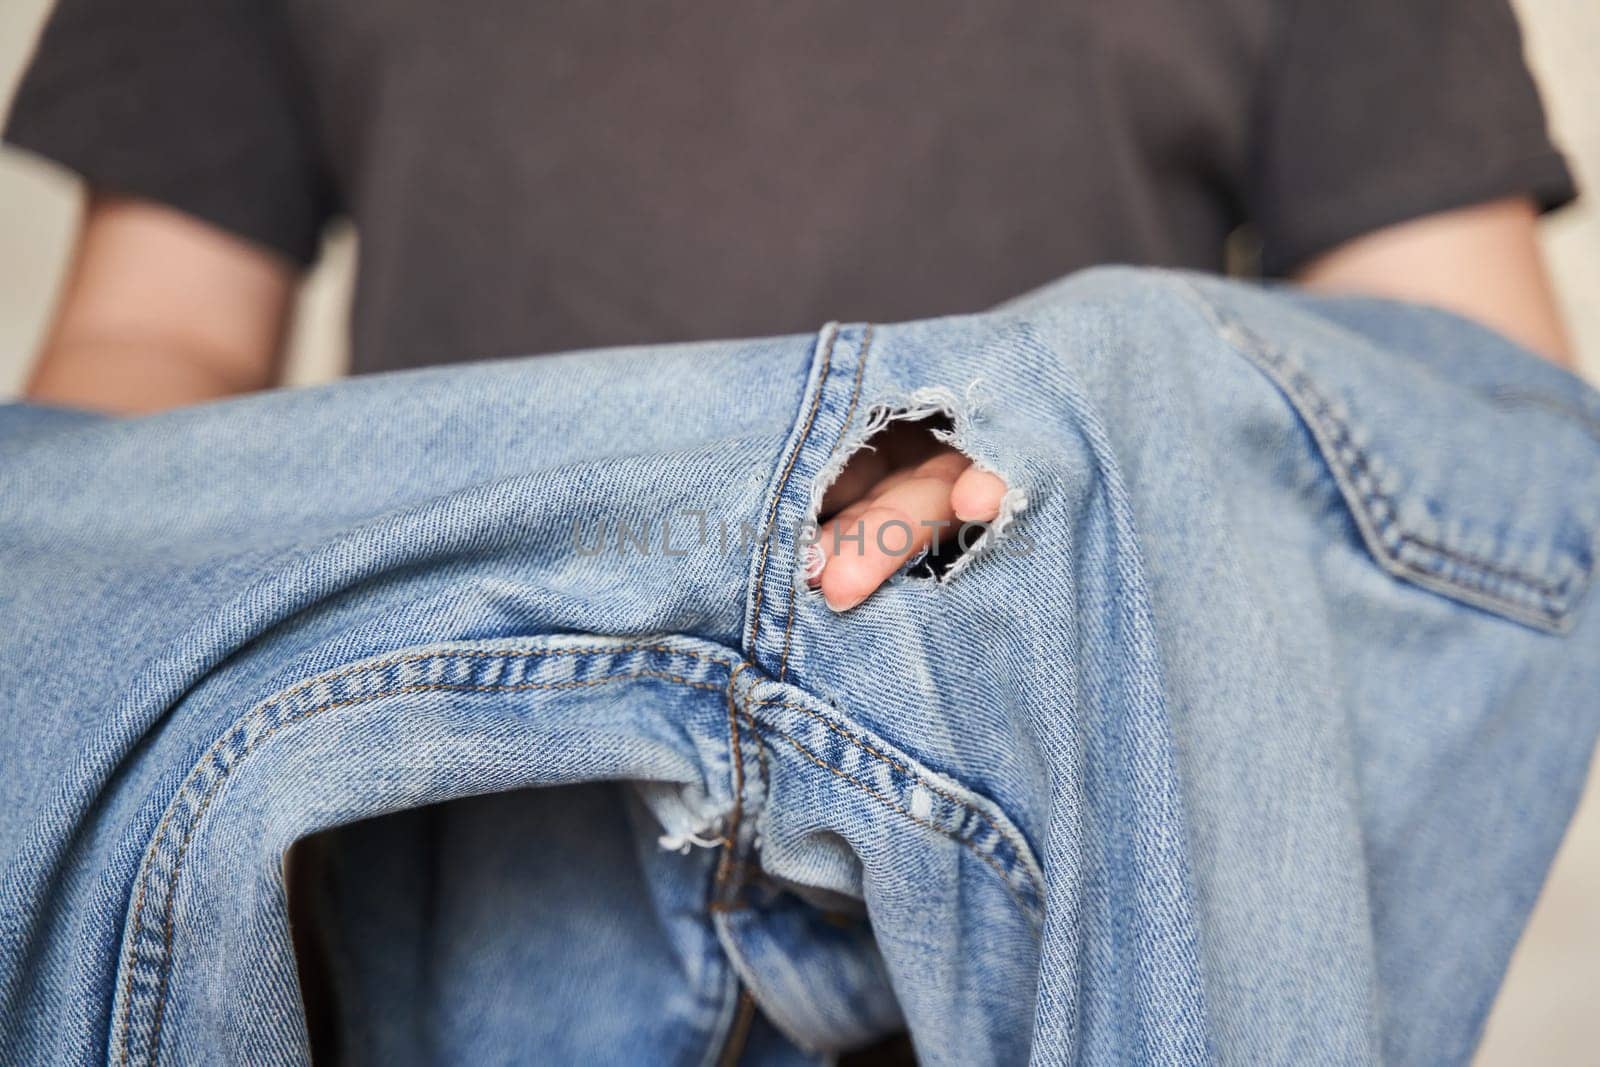 Jeans worn between the legs to the hole. by driver-s